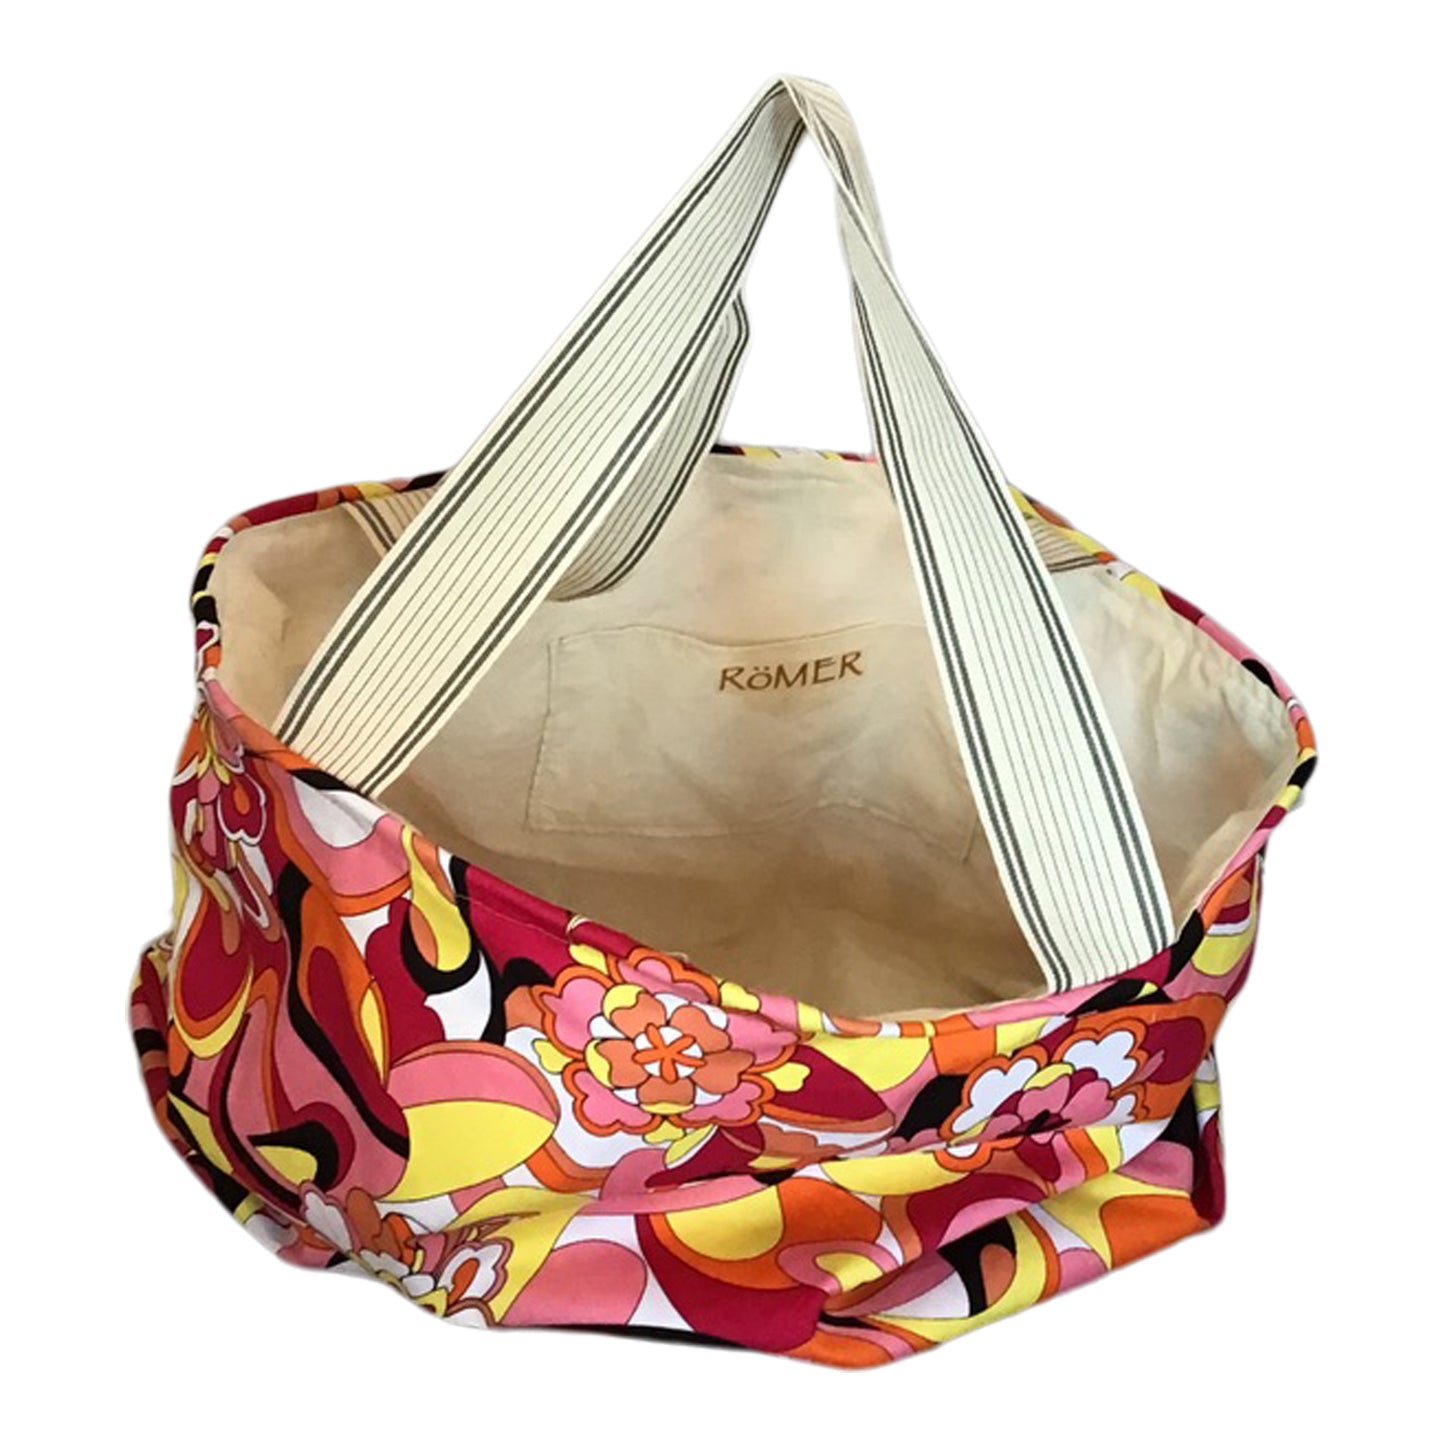 Tote bag in cotton Pucci-inspired print